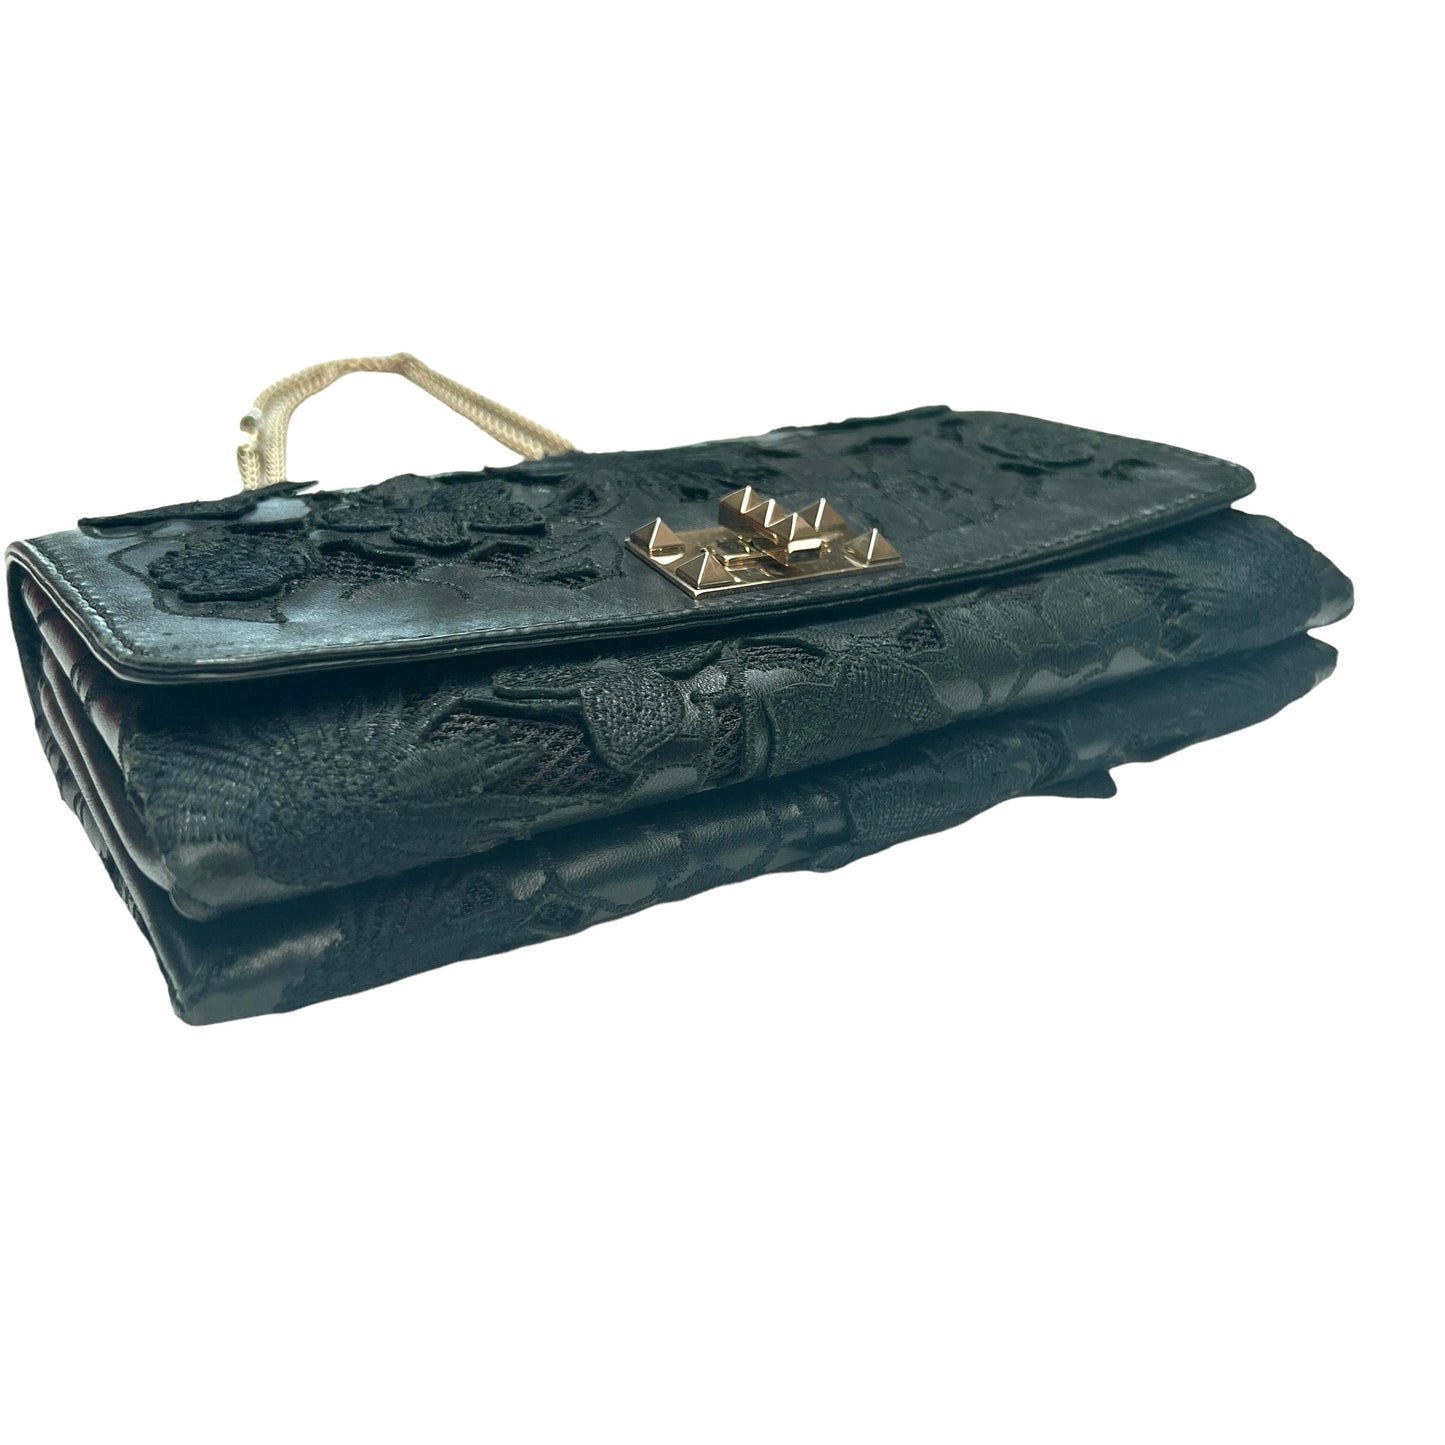 Black Lace Perforated Leather Clutch